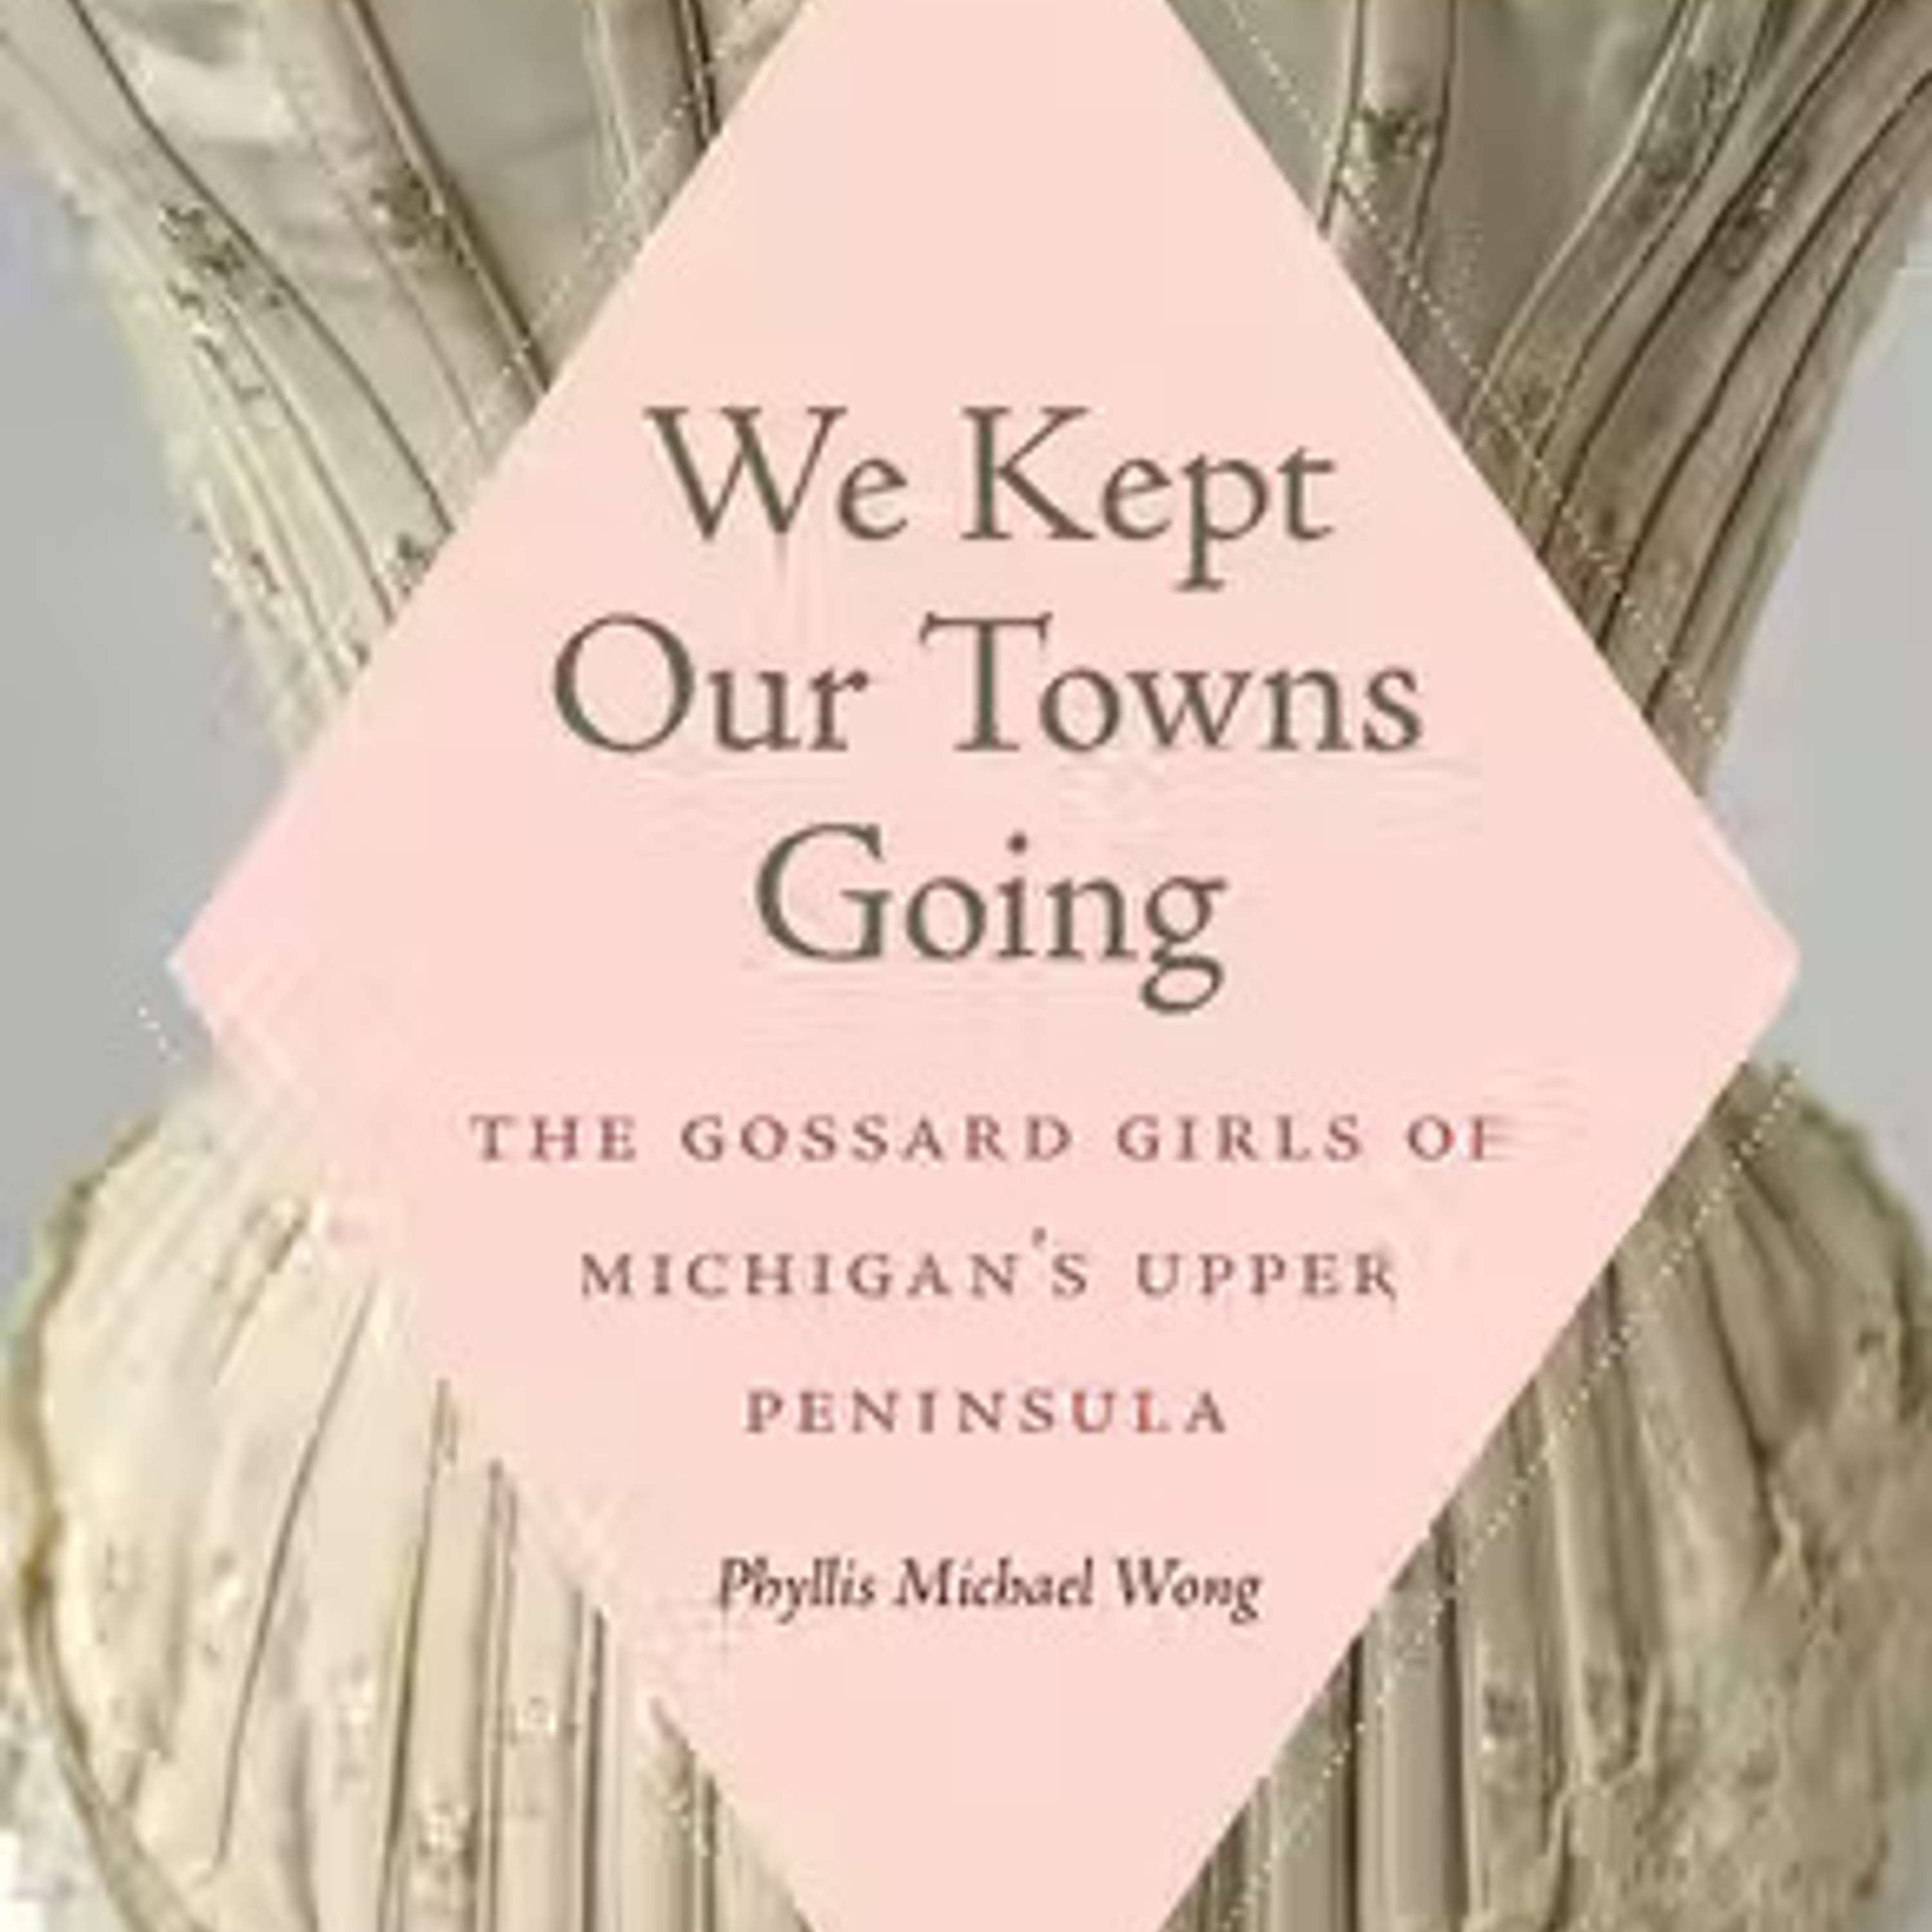 We Kept Our Towns Going: The Gossard Girls in Michigan's Upper Peninsula